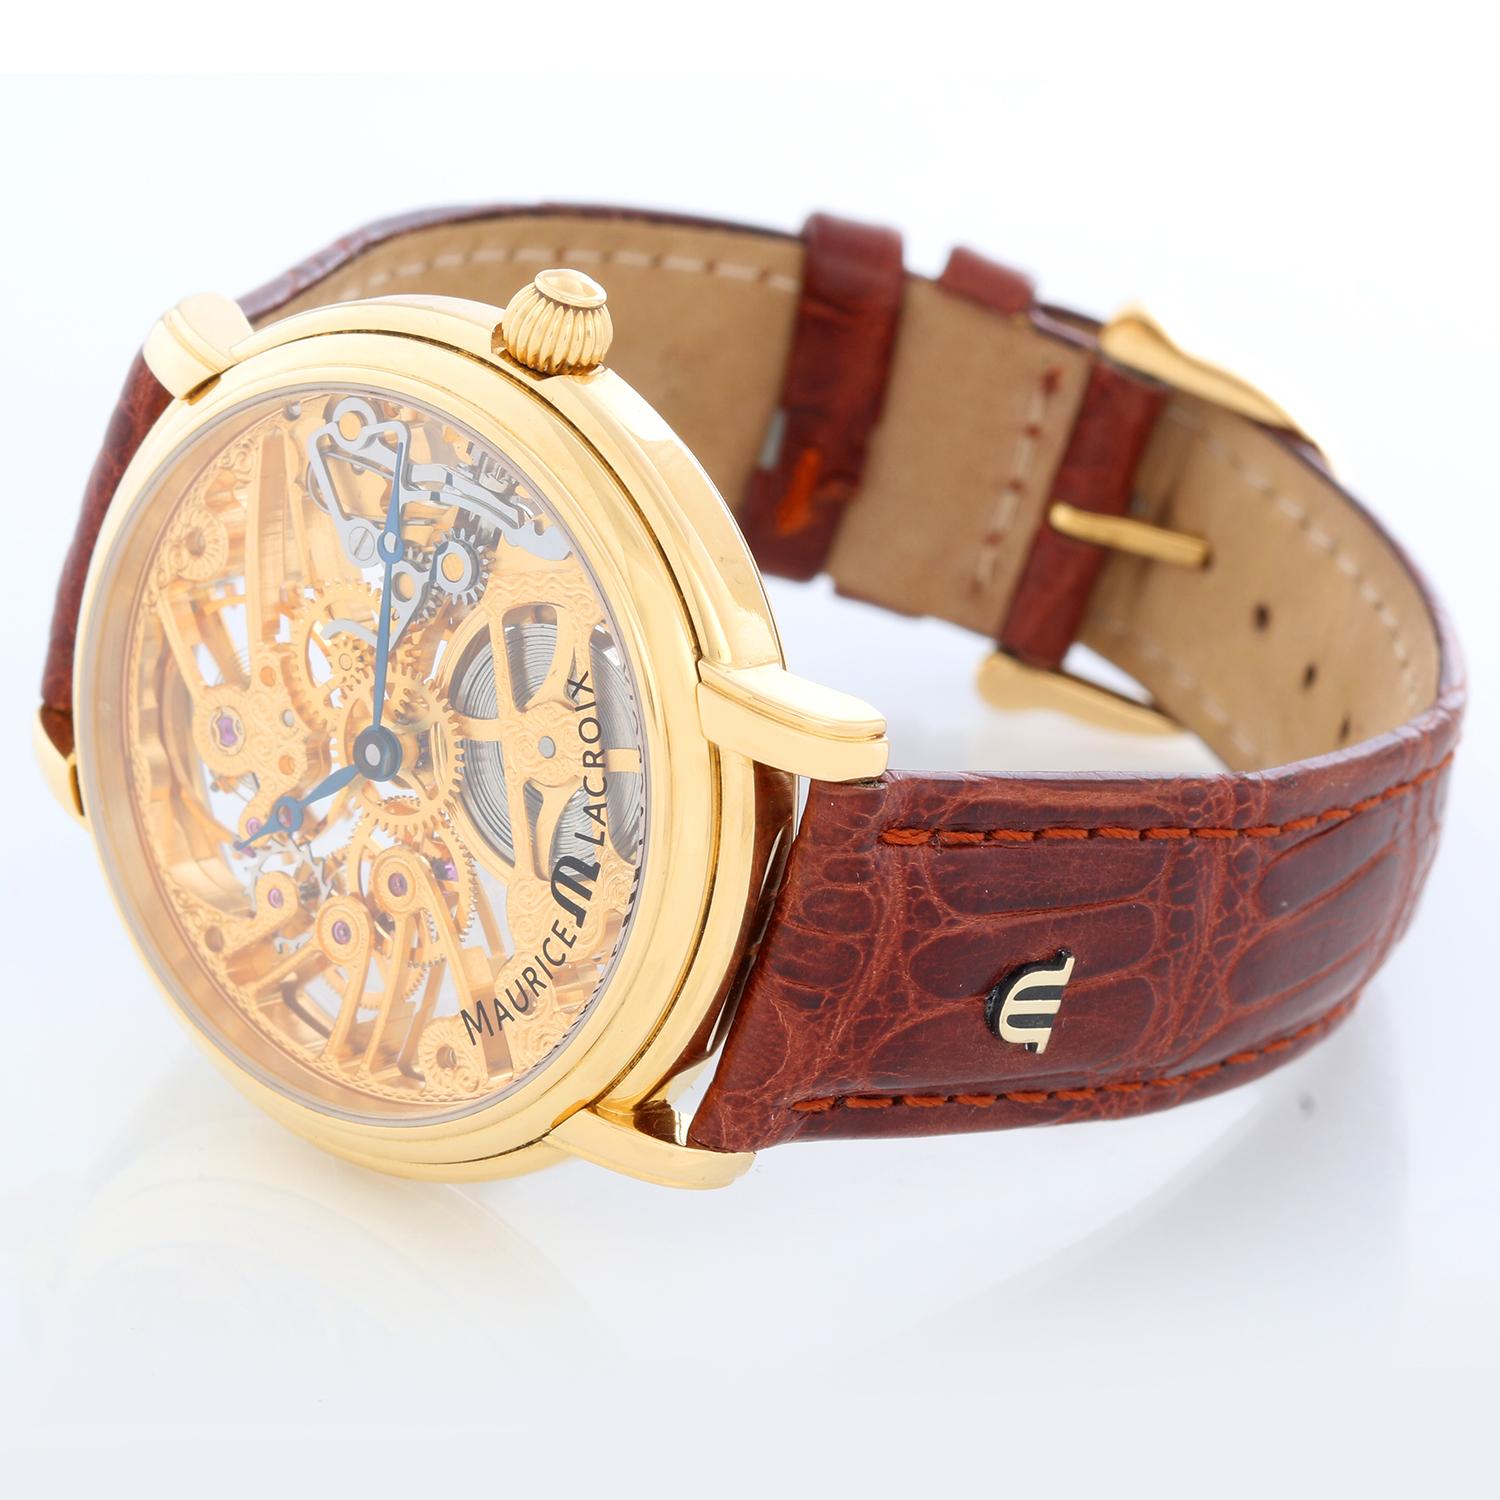 Maurice Lacroix Masterpiece Squelette 18K Yellow Gold Mens Watch - Manual winding. 18K yellow gold ( 43 mm ). Skeleton dial. Brown leather Maurice Lacroix strap with gold Maurice Lacroix buckle. Pre-owned with box and papers.